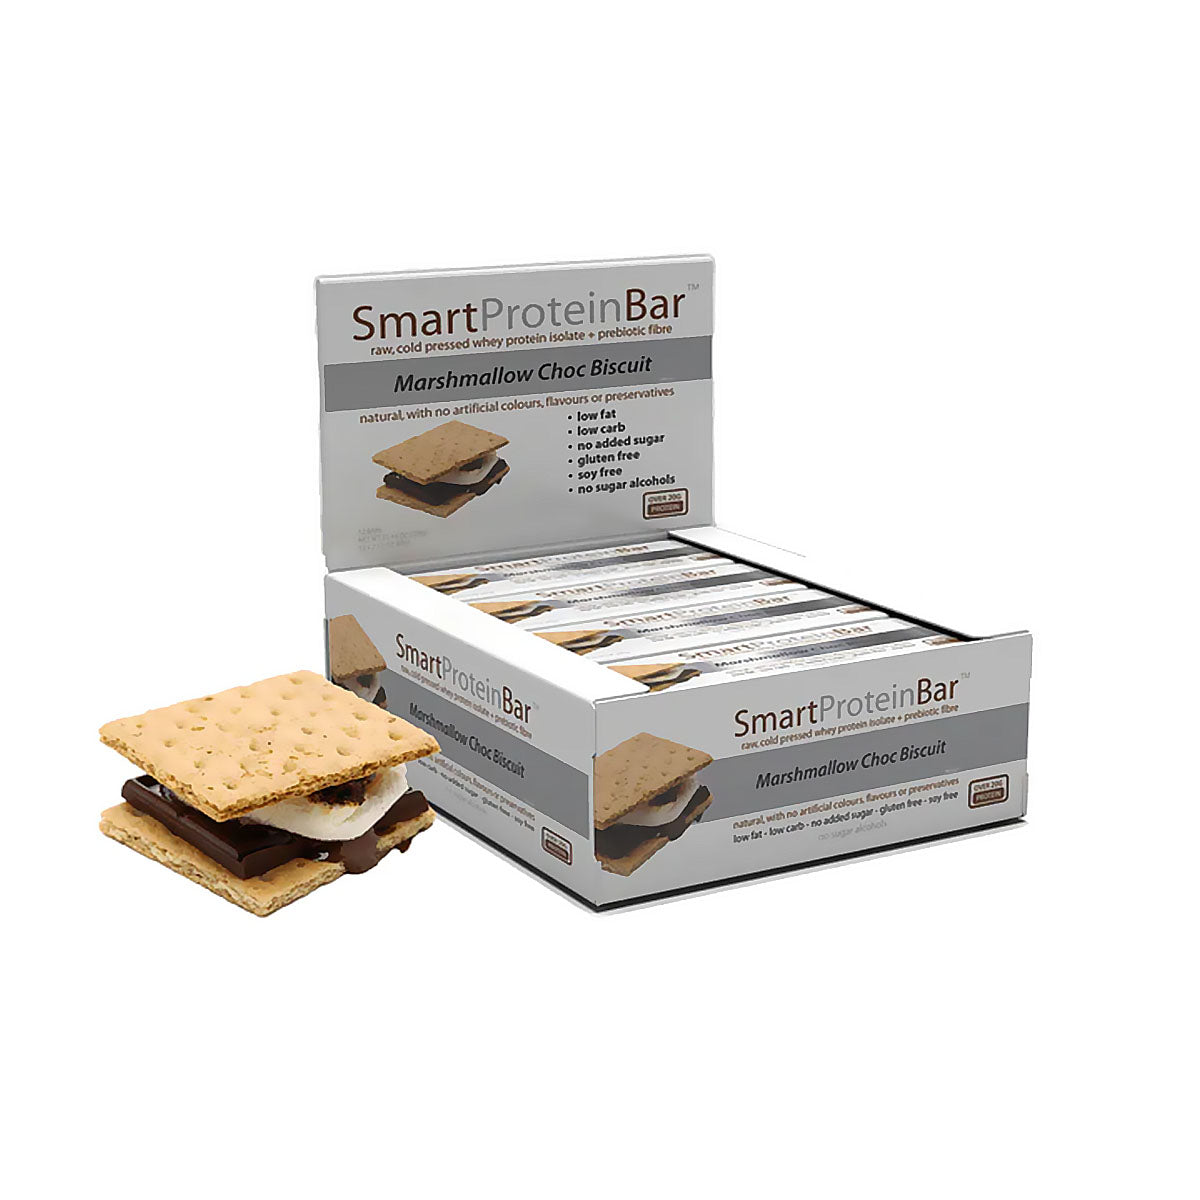 Smart Protein Bar - Marshmallow Choc Biscuit - Box of 12 - 720g - Ketogenic Supplies